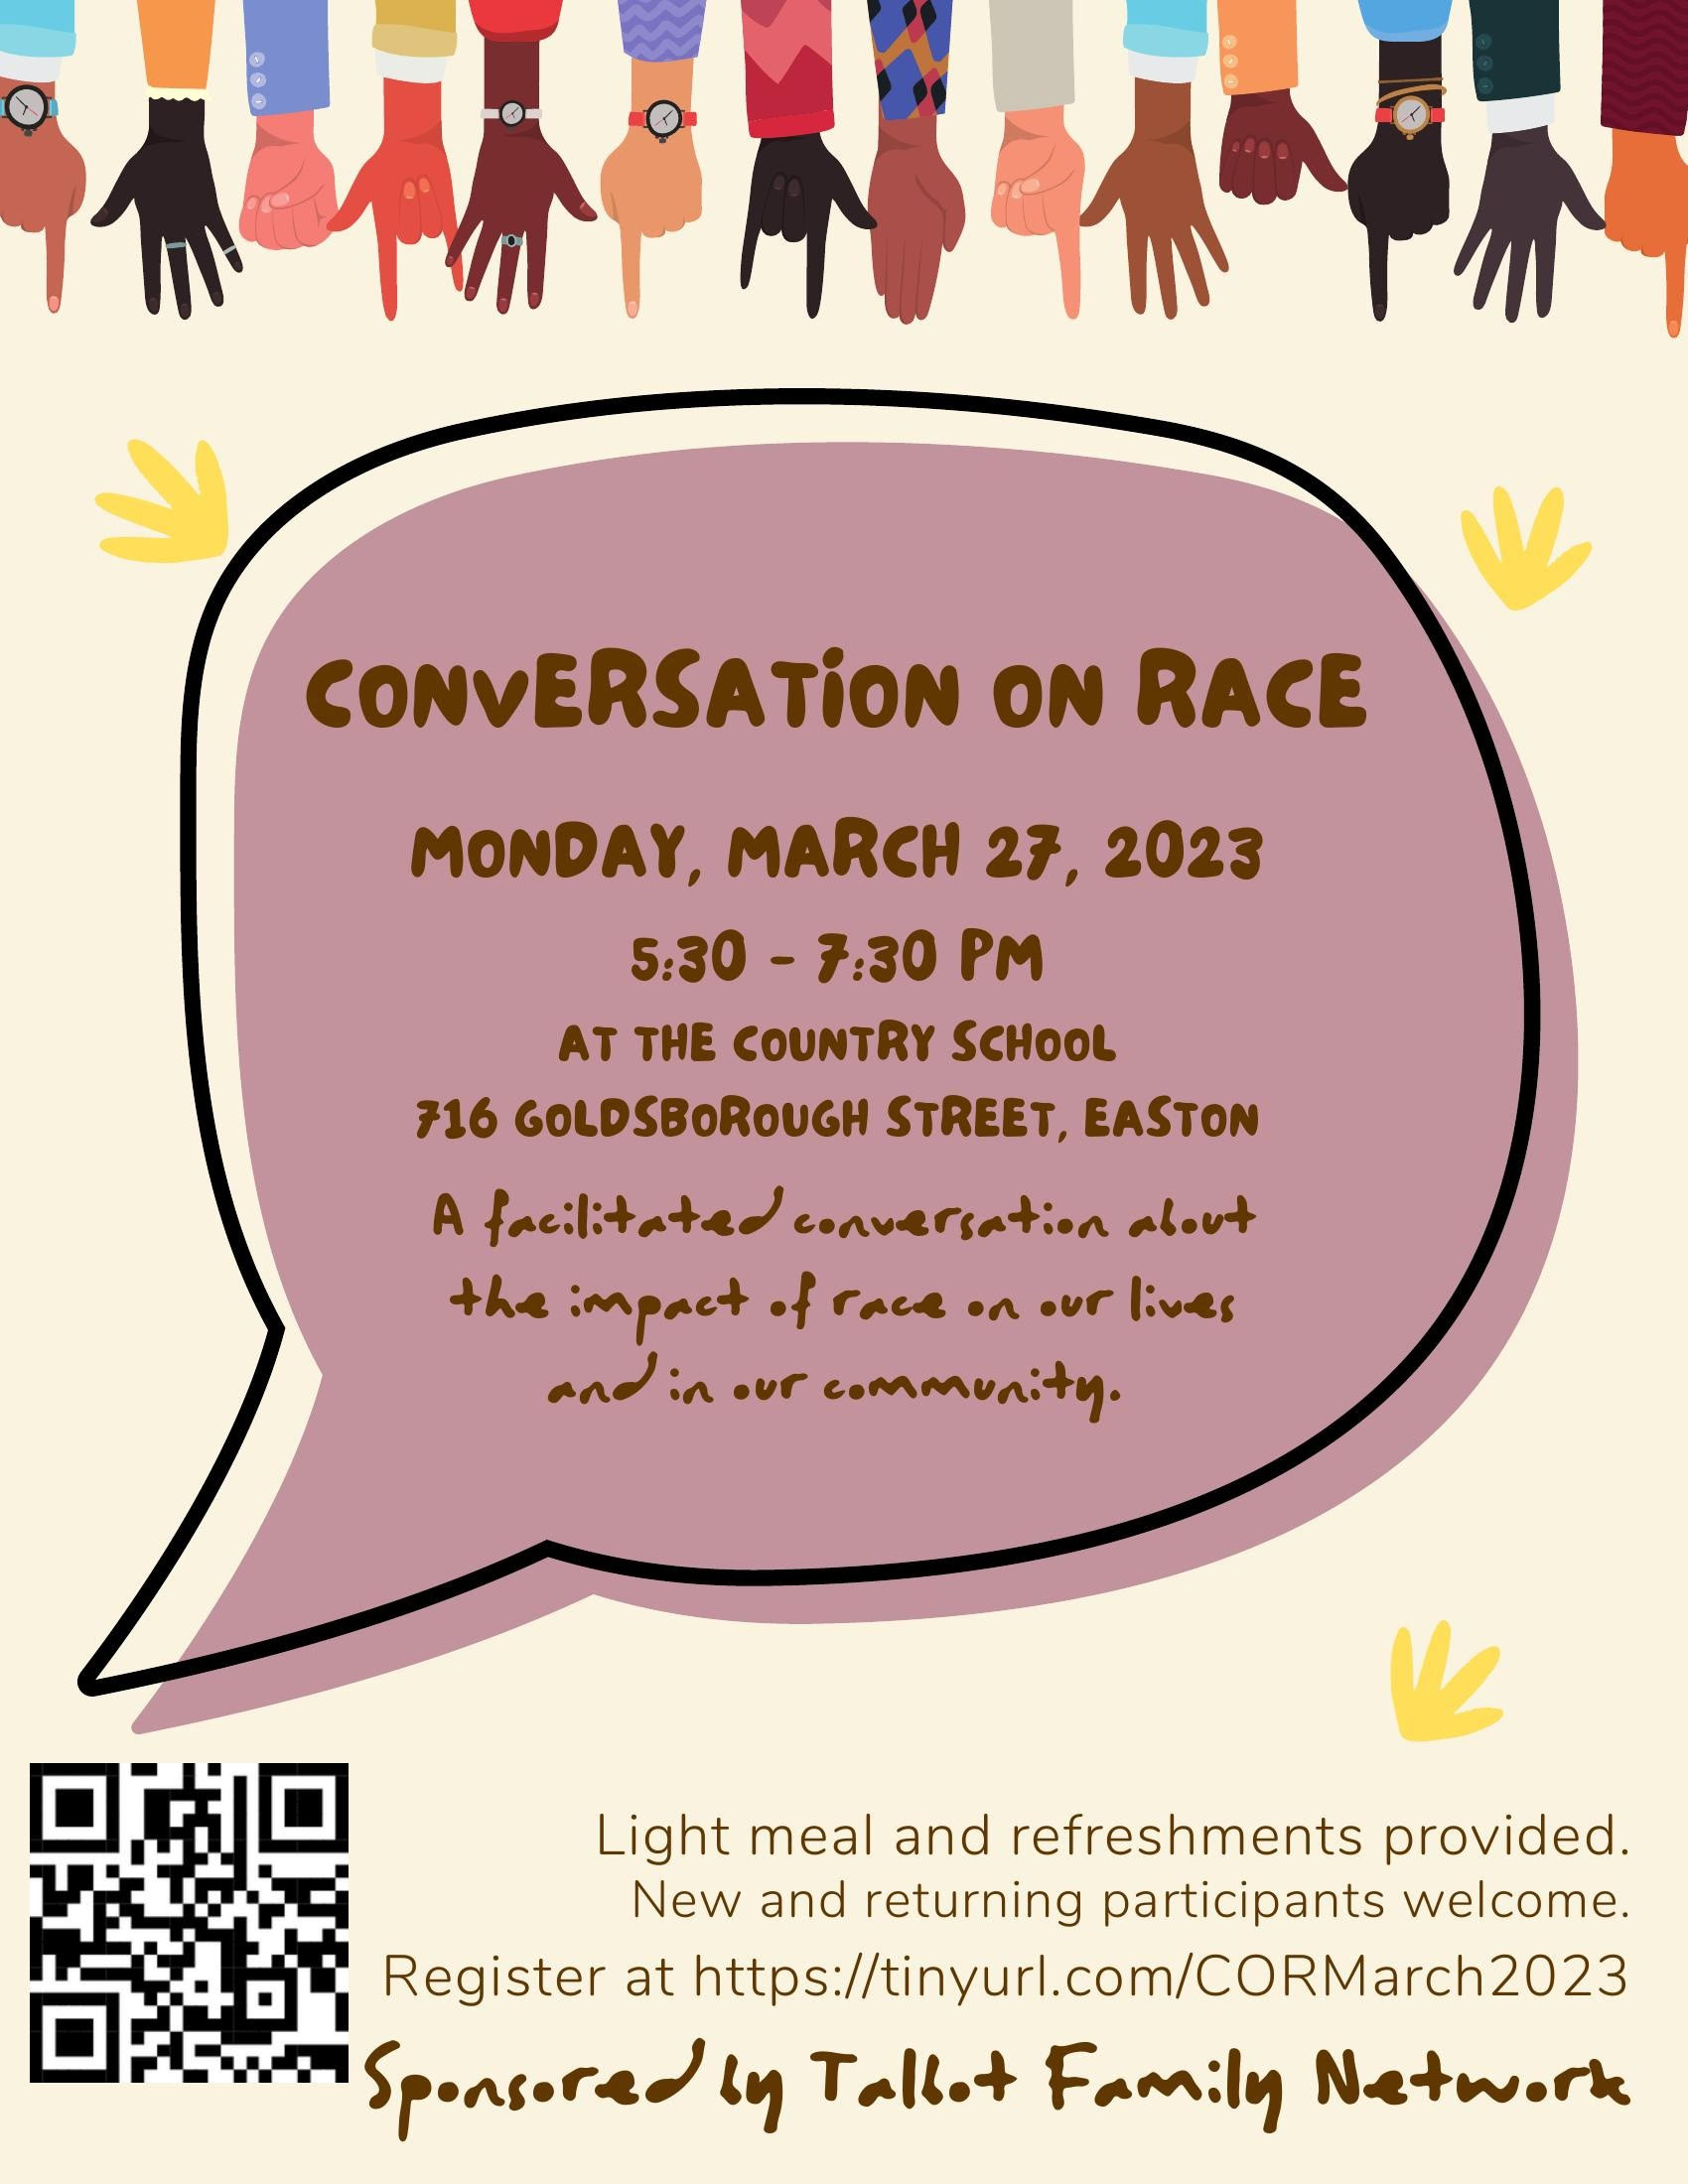 Flyer for Conversation on Race, text is the same as below